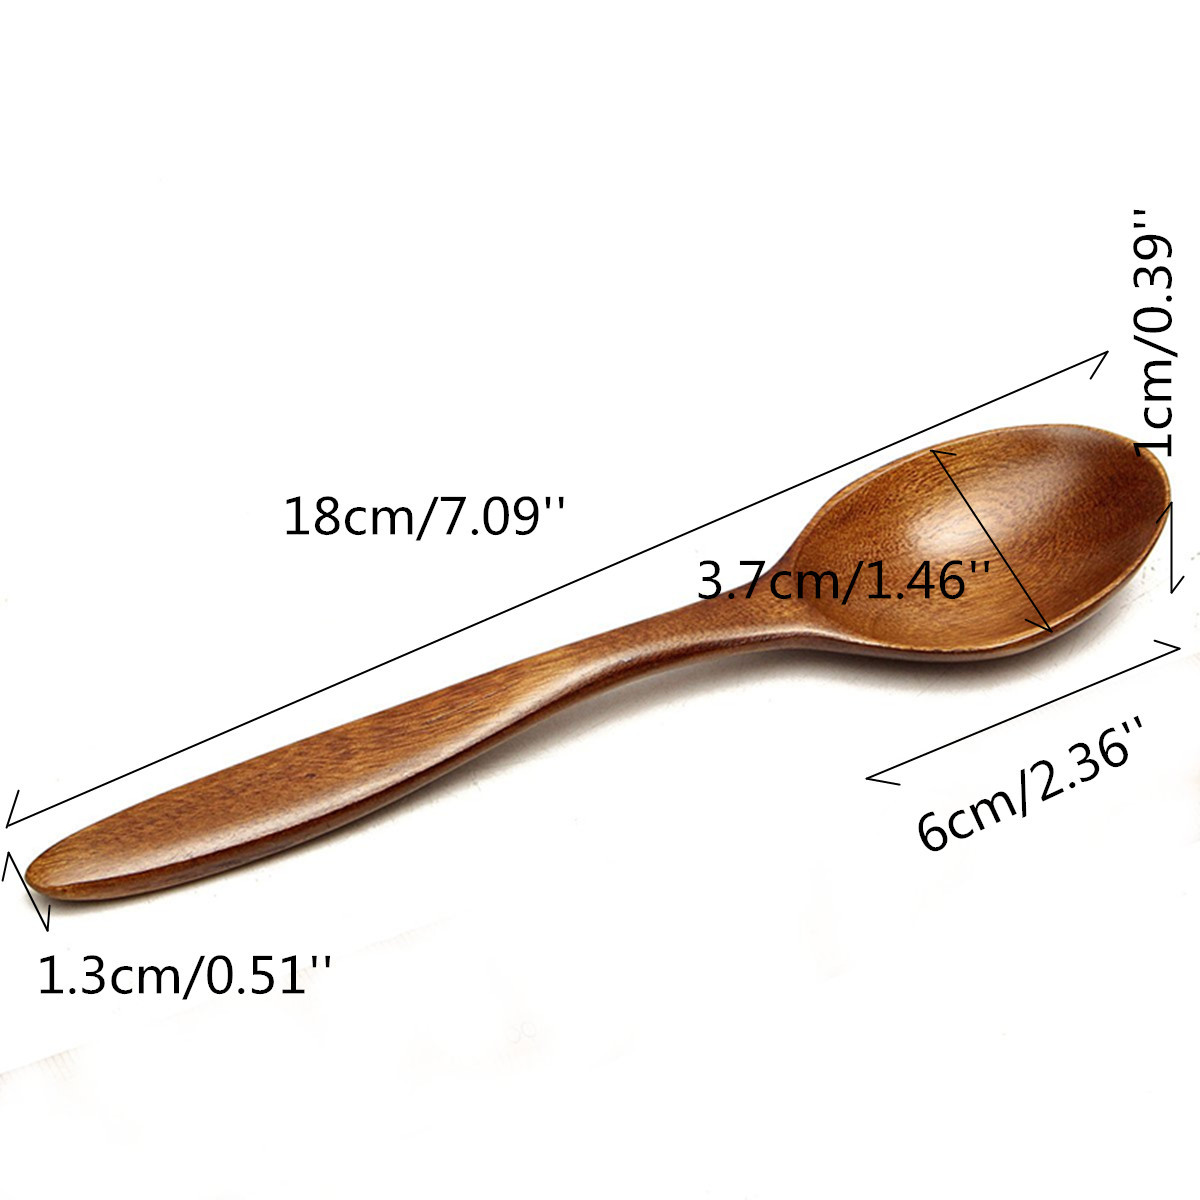 5Pcs-Wooden-Cooking-Kitchen-Utensil-Coffee-Tea-Ice-Cream-Soup-Caterin-Spoon-Tool-1067937-8